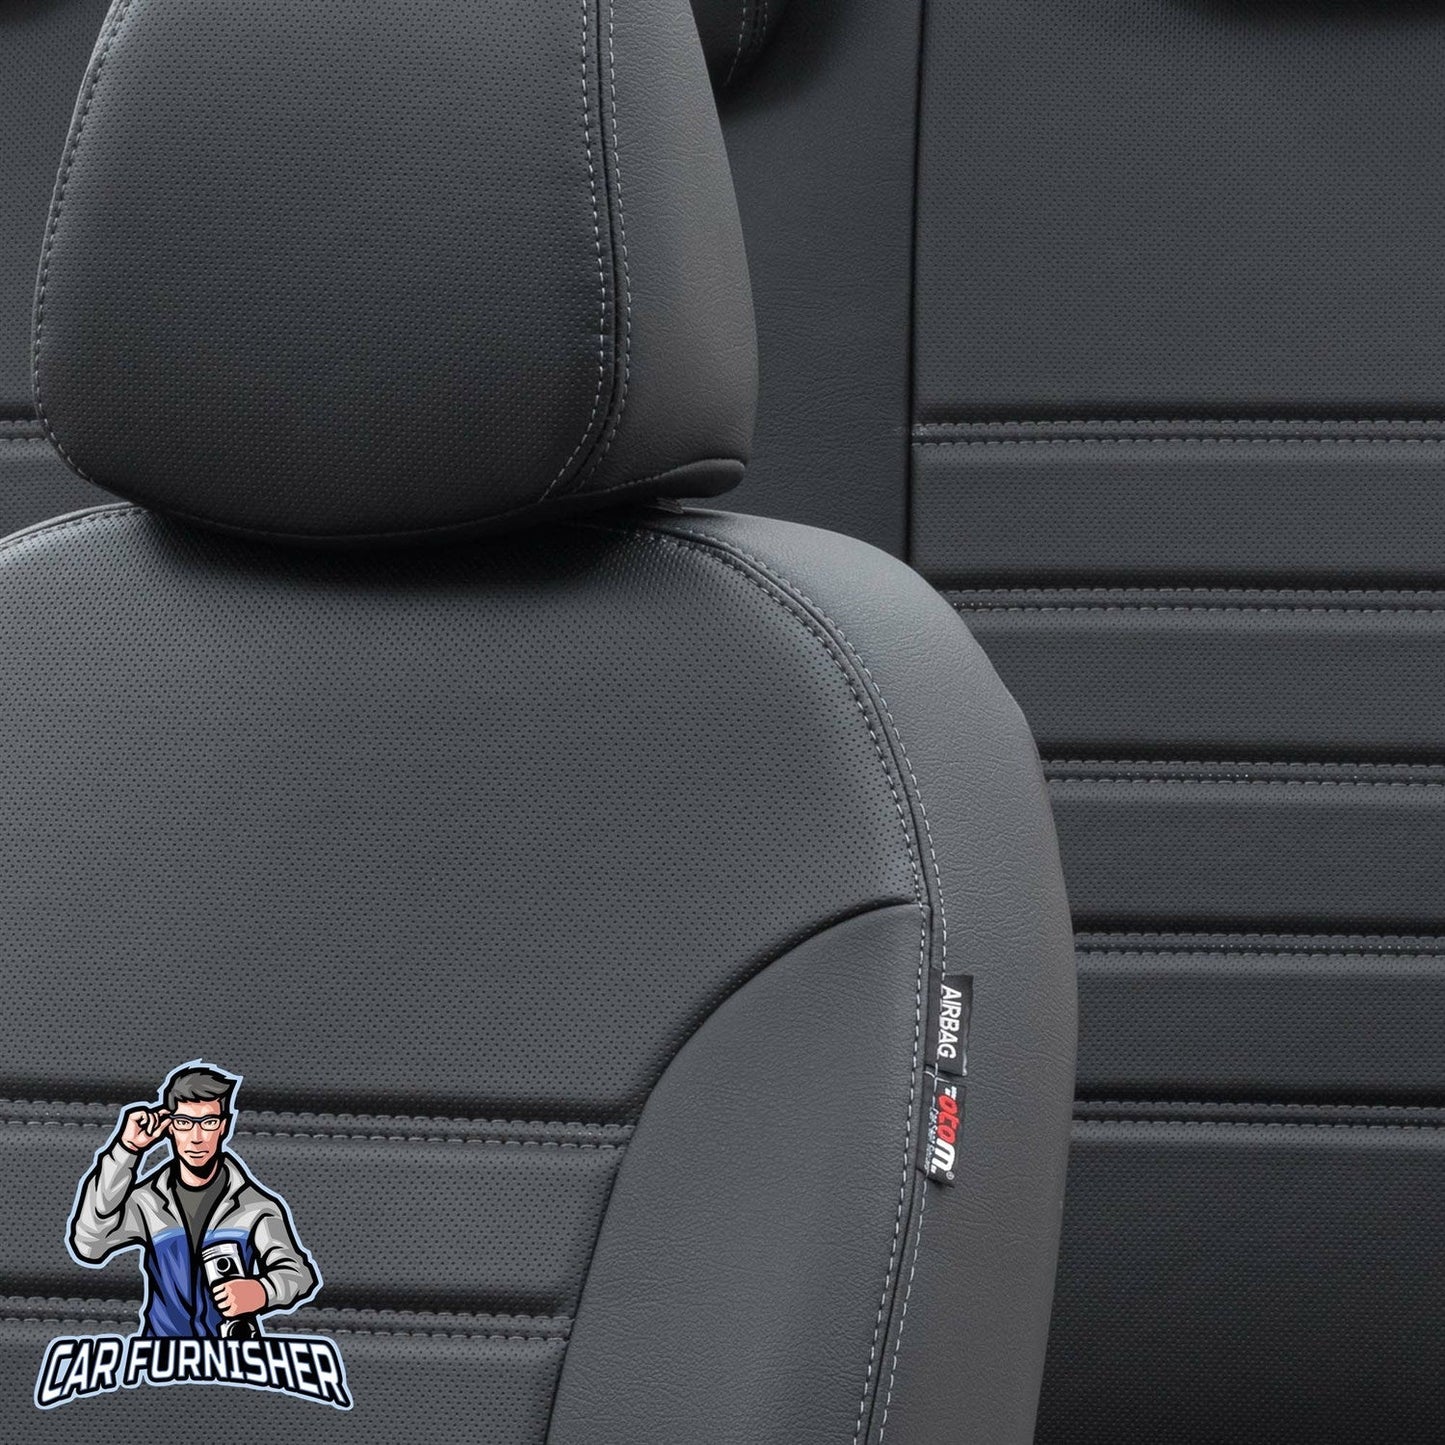 Iveco Eurocargo Seat Cover Istanbul Leather Design Black Leather